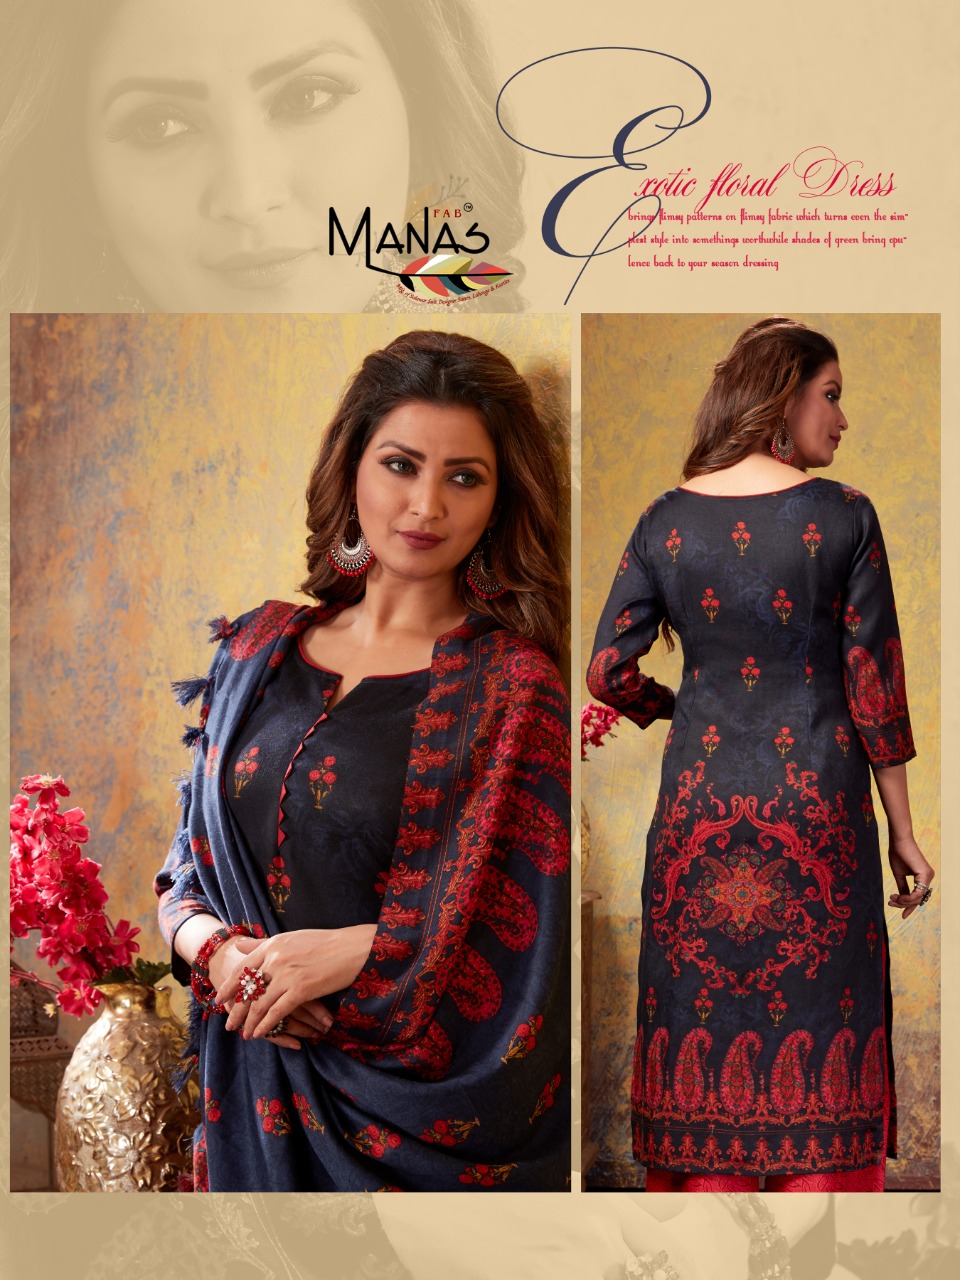 Manas Presents Pashmina Plaazo Special Winter Wear Top With Plazzo Collection